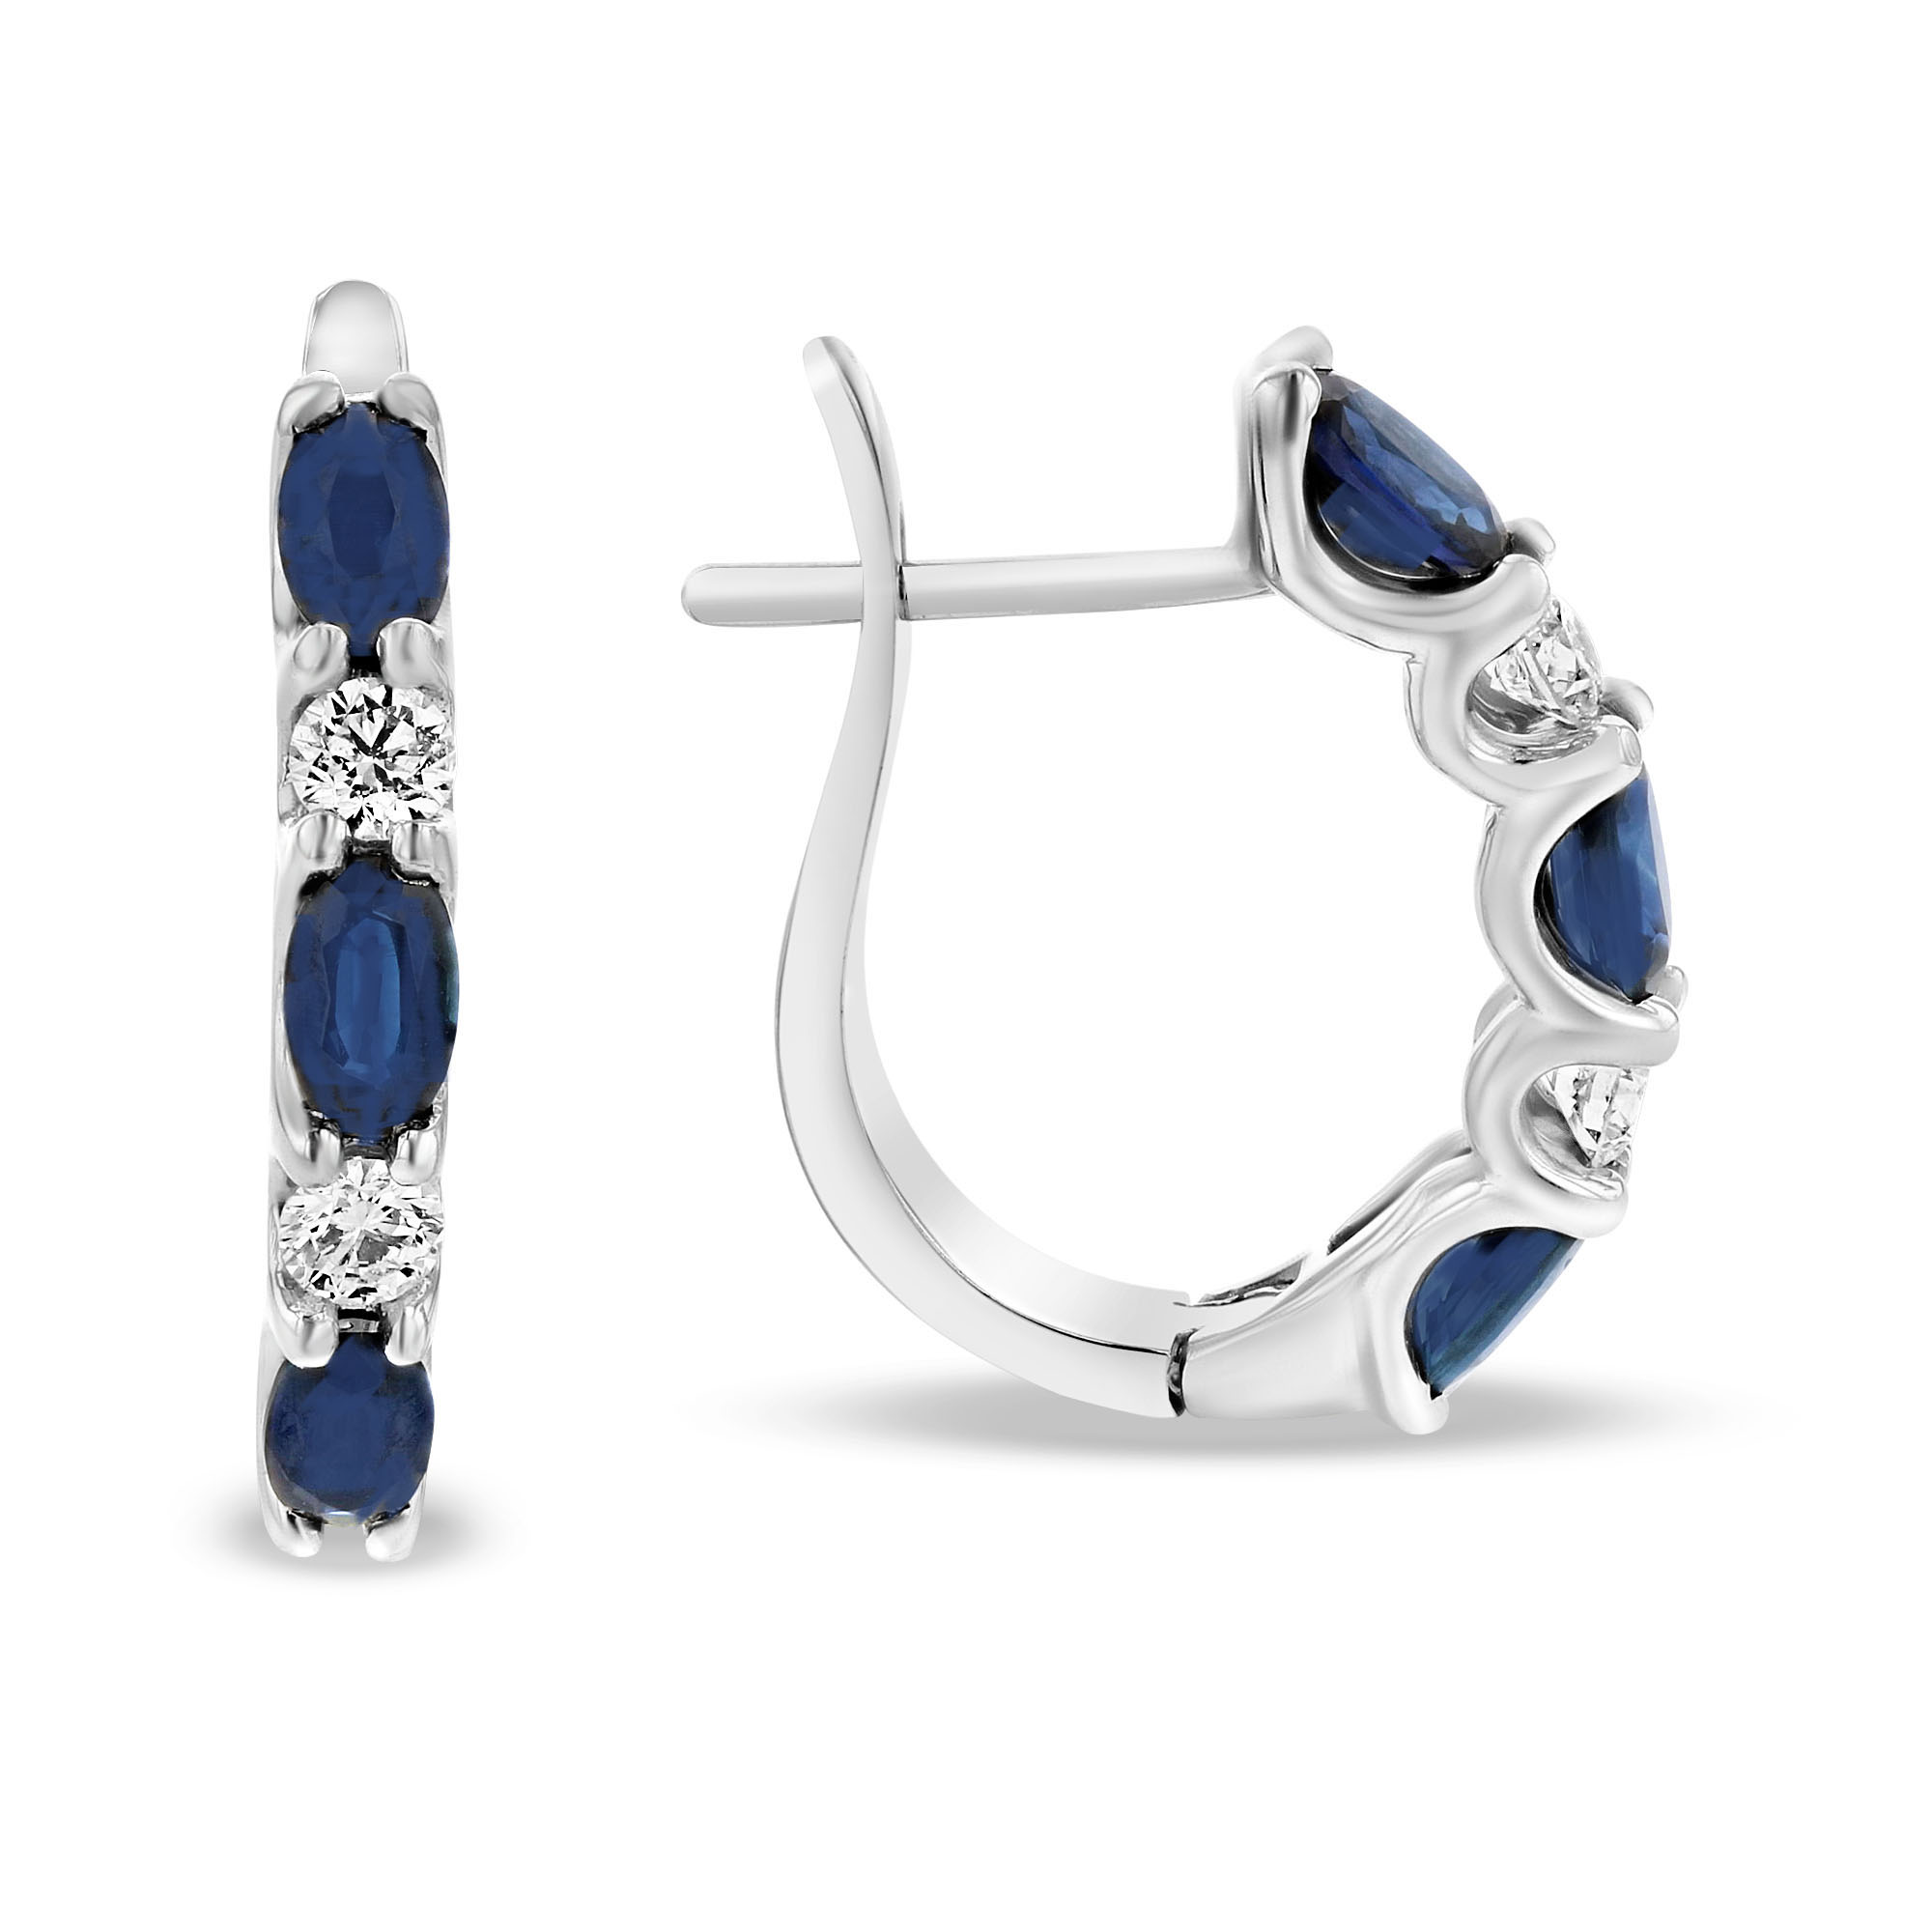 2.05ctw Diamond and Sapphire Hoop Earrings in 14k White Gold